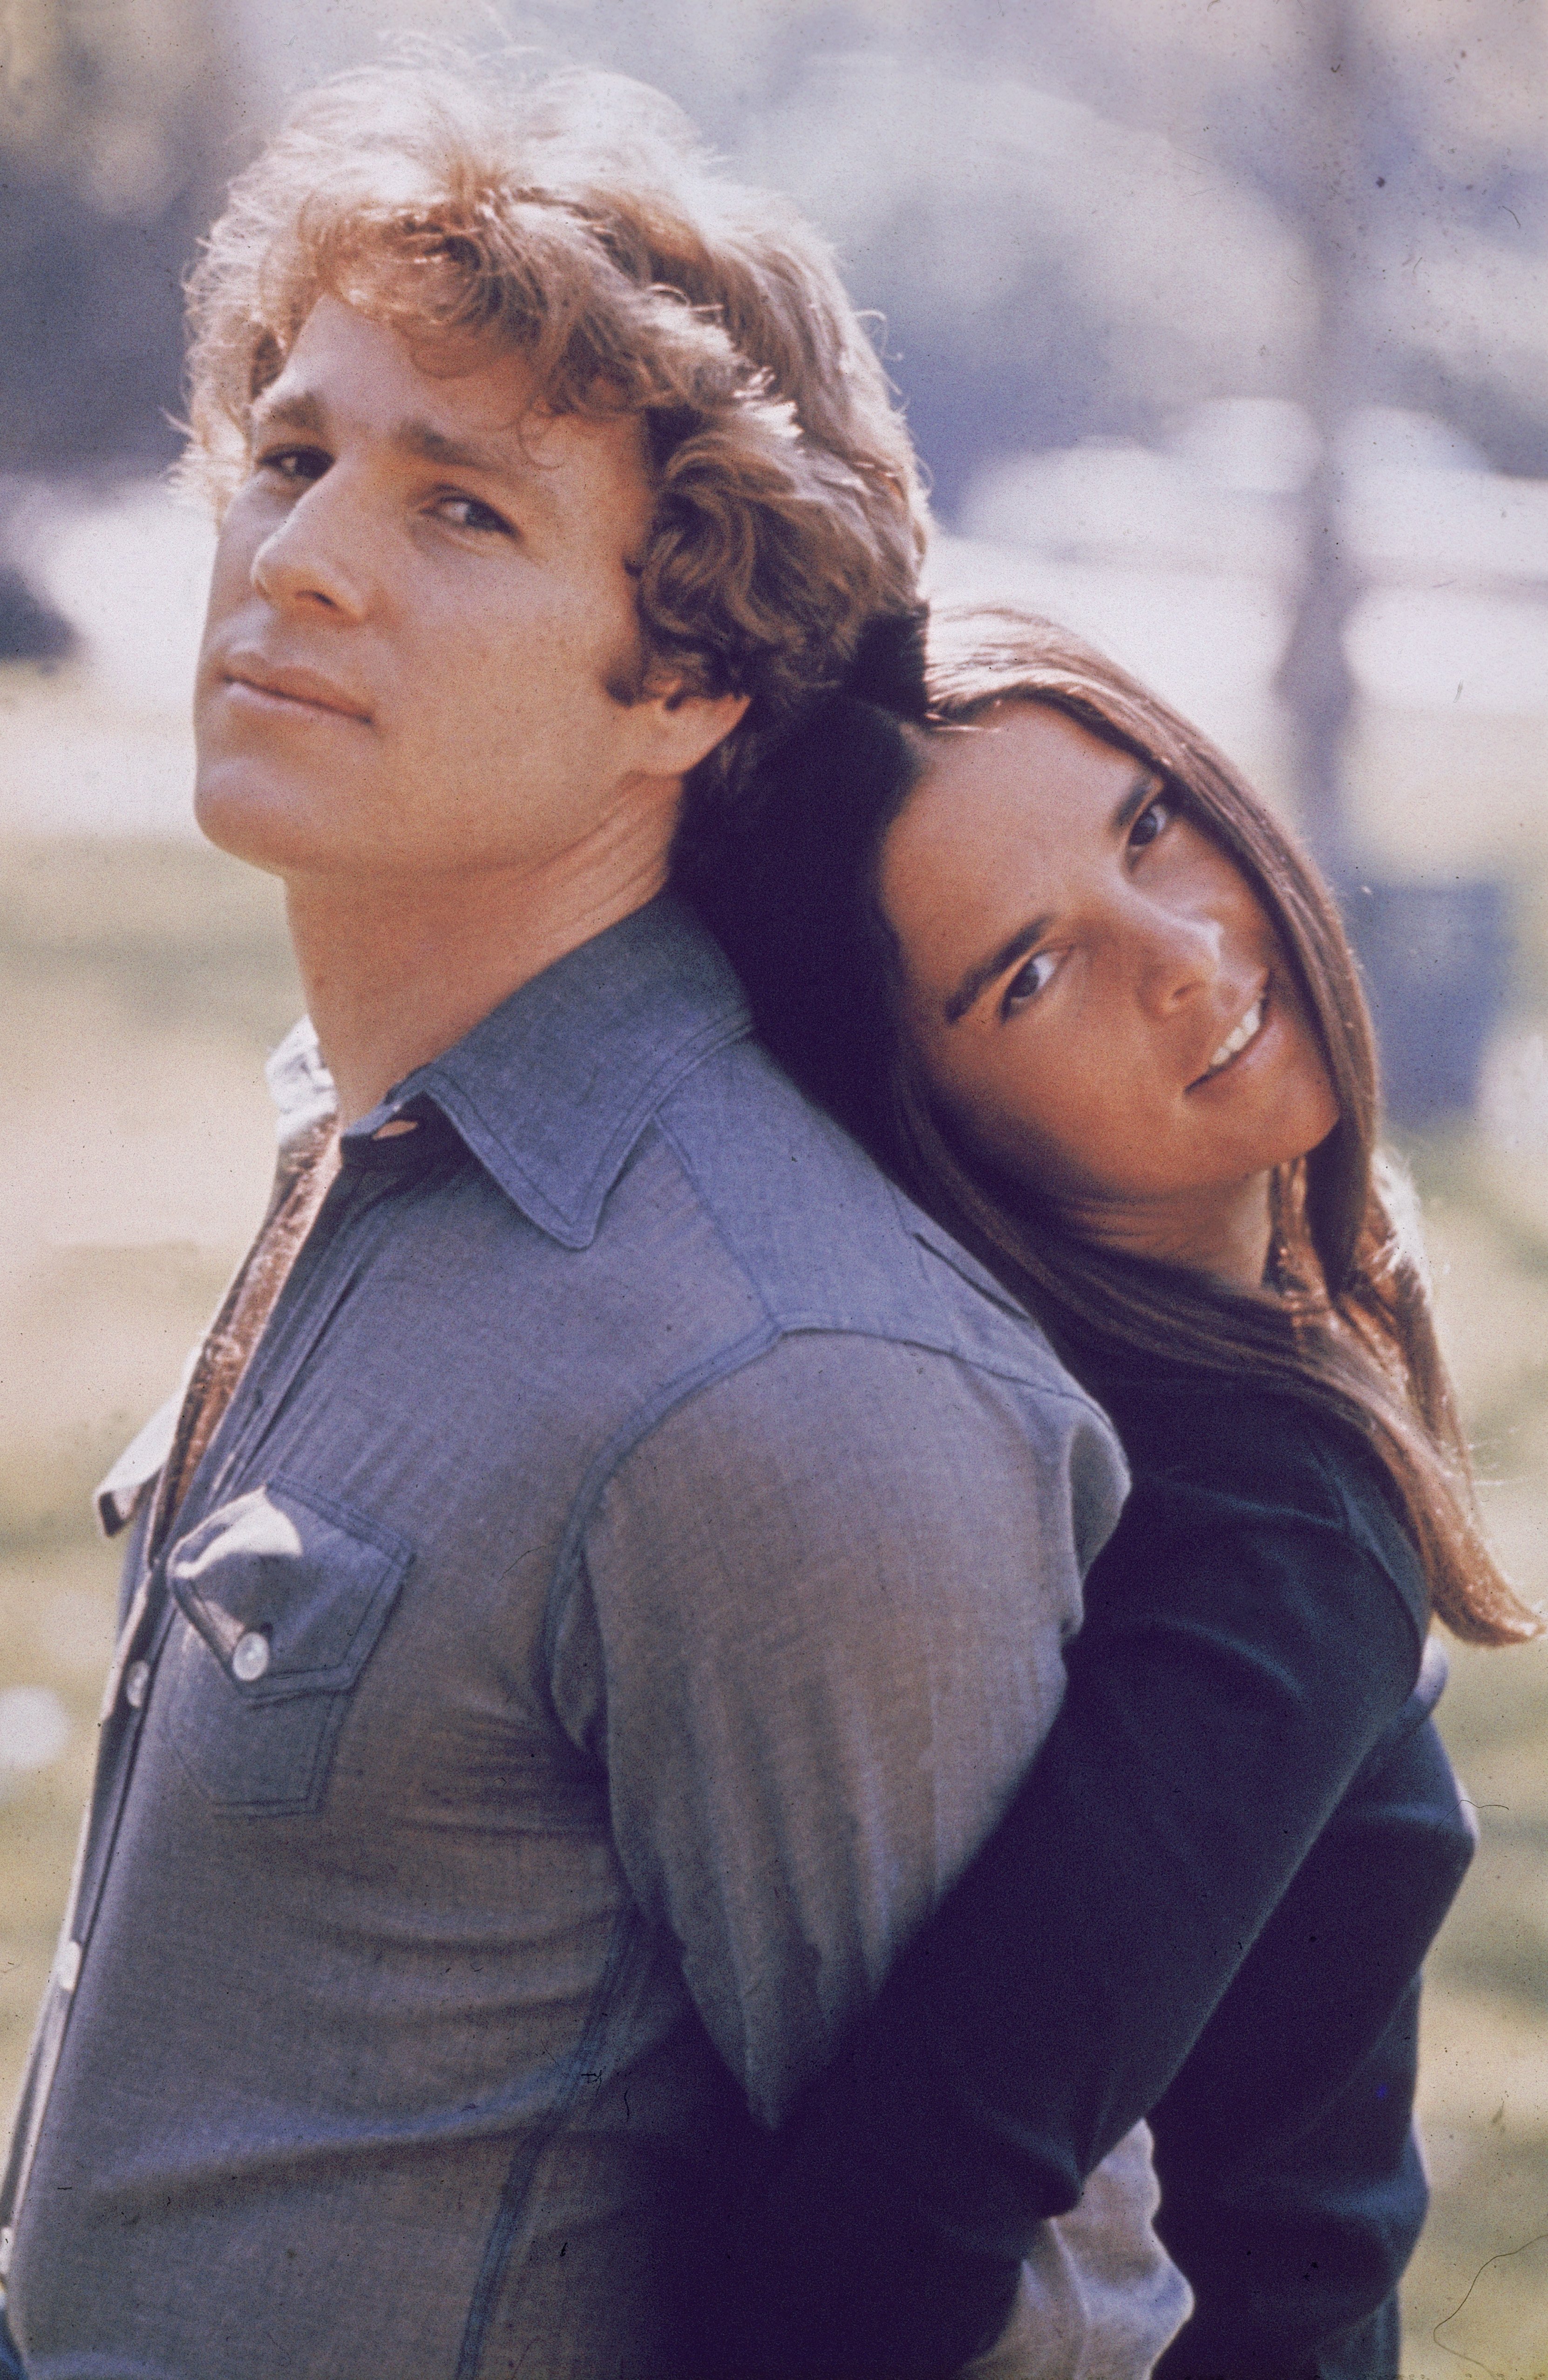 Ryan O'Neal and Ali MacGraw stand back to back outdoors in a still from the film, 'Love Story,' 1970 | Photo: Getty Images